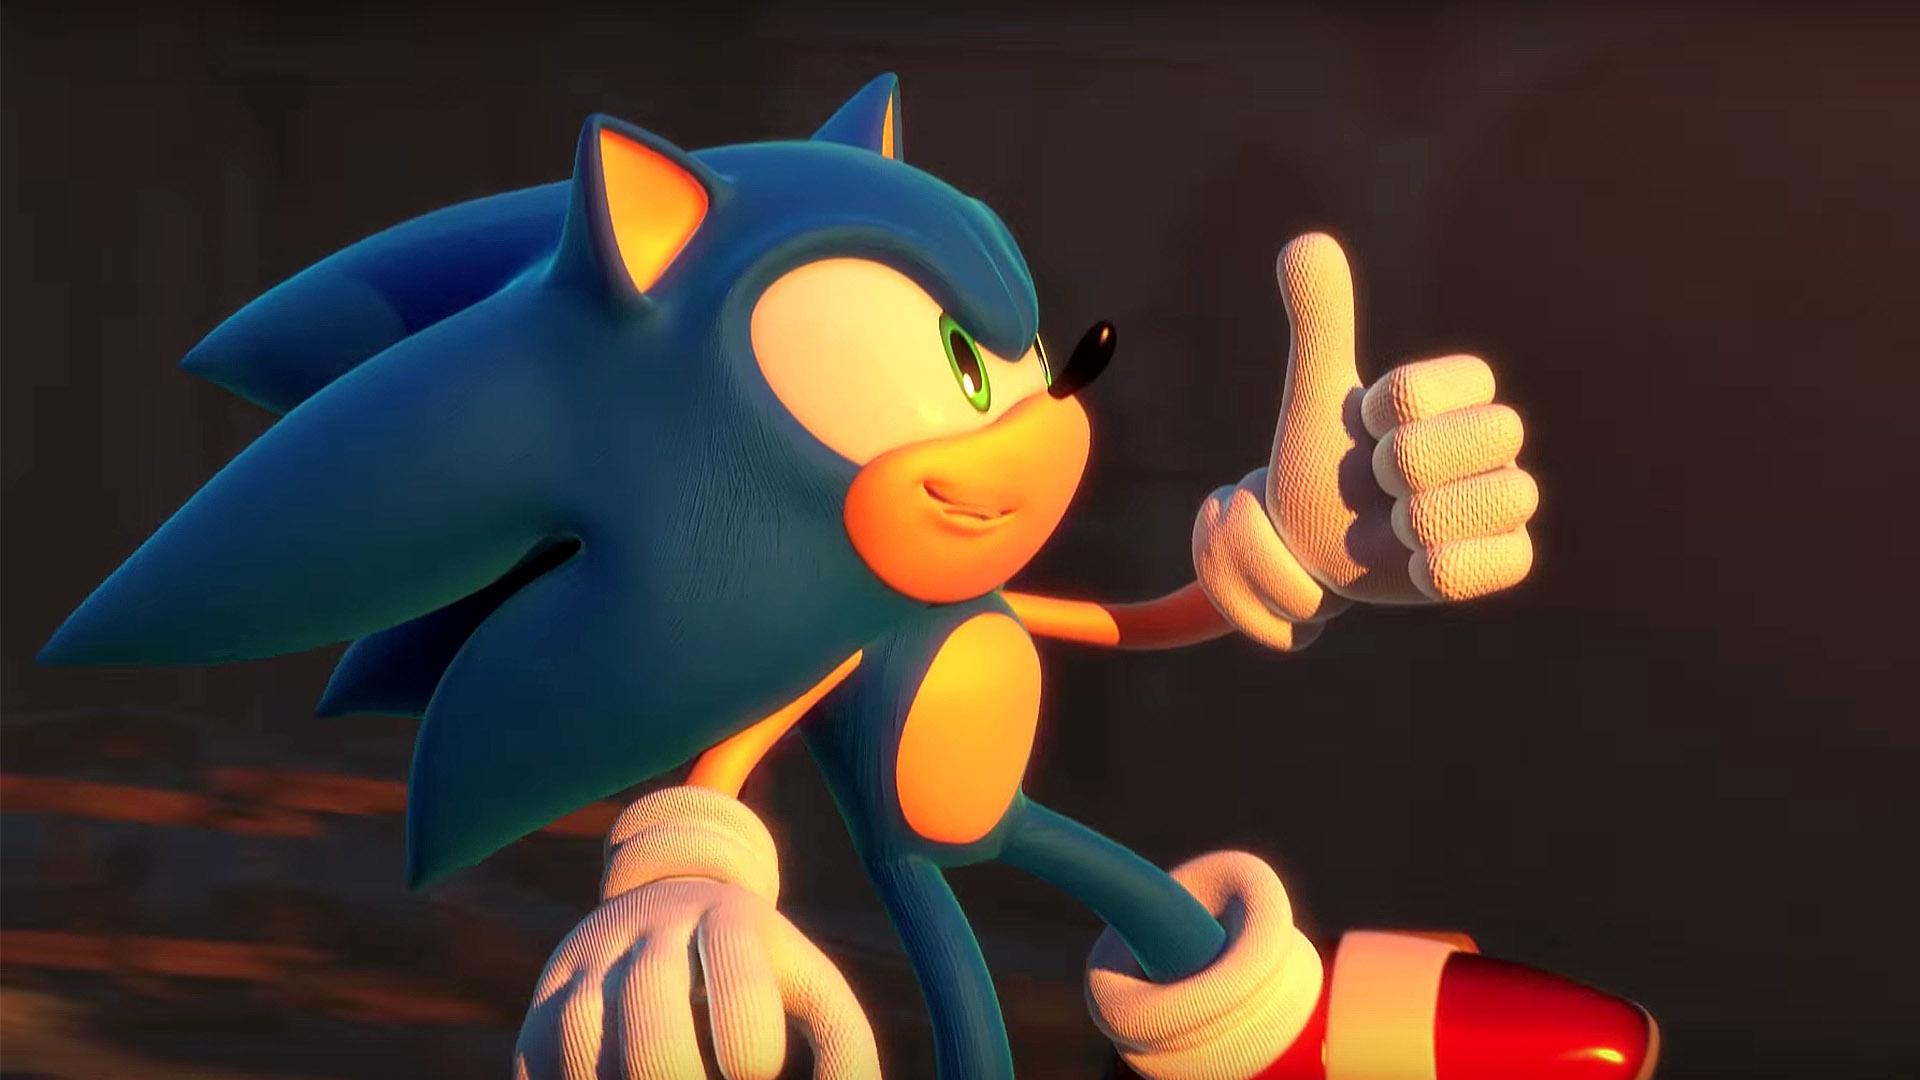 The 'Sonic the Hedgehog' movie is coming November 2019